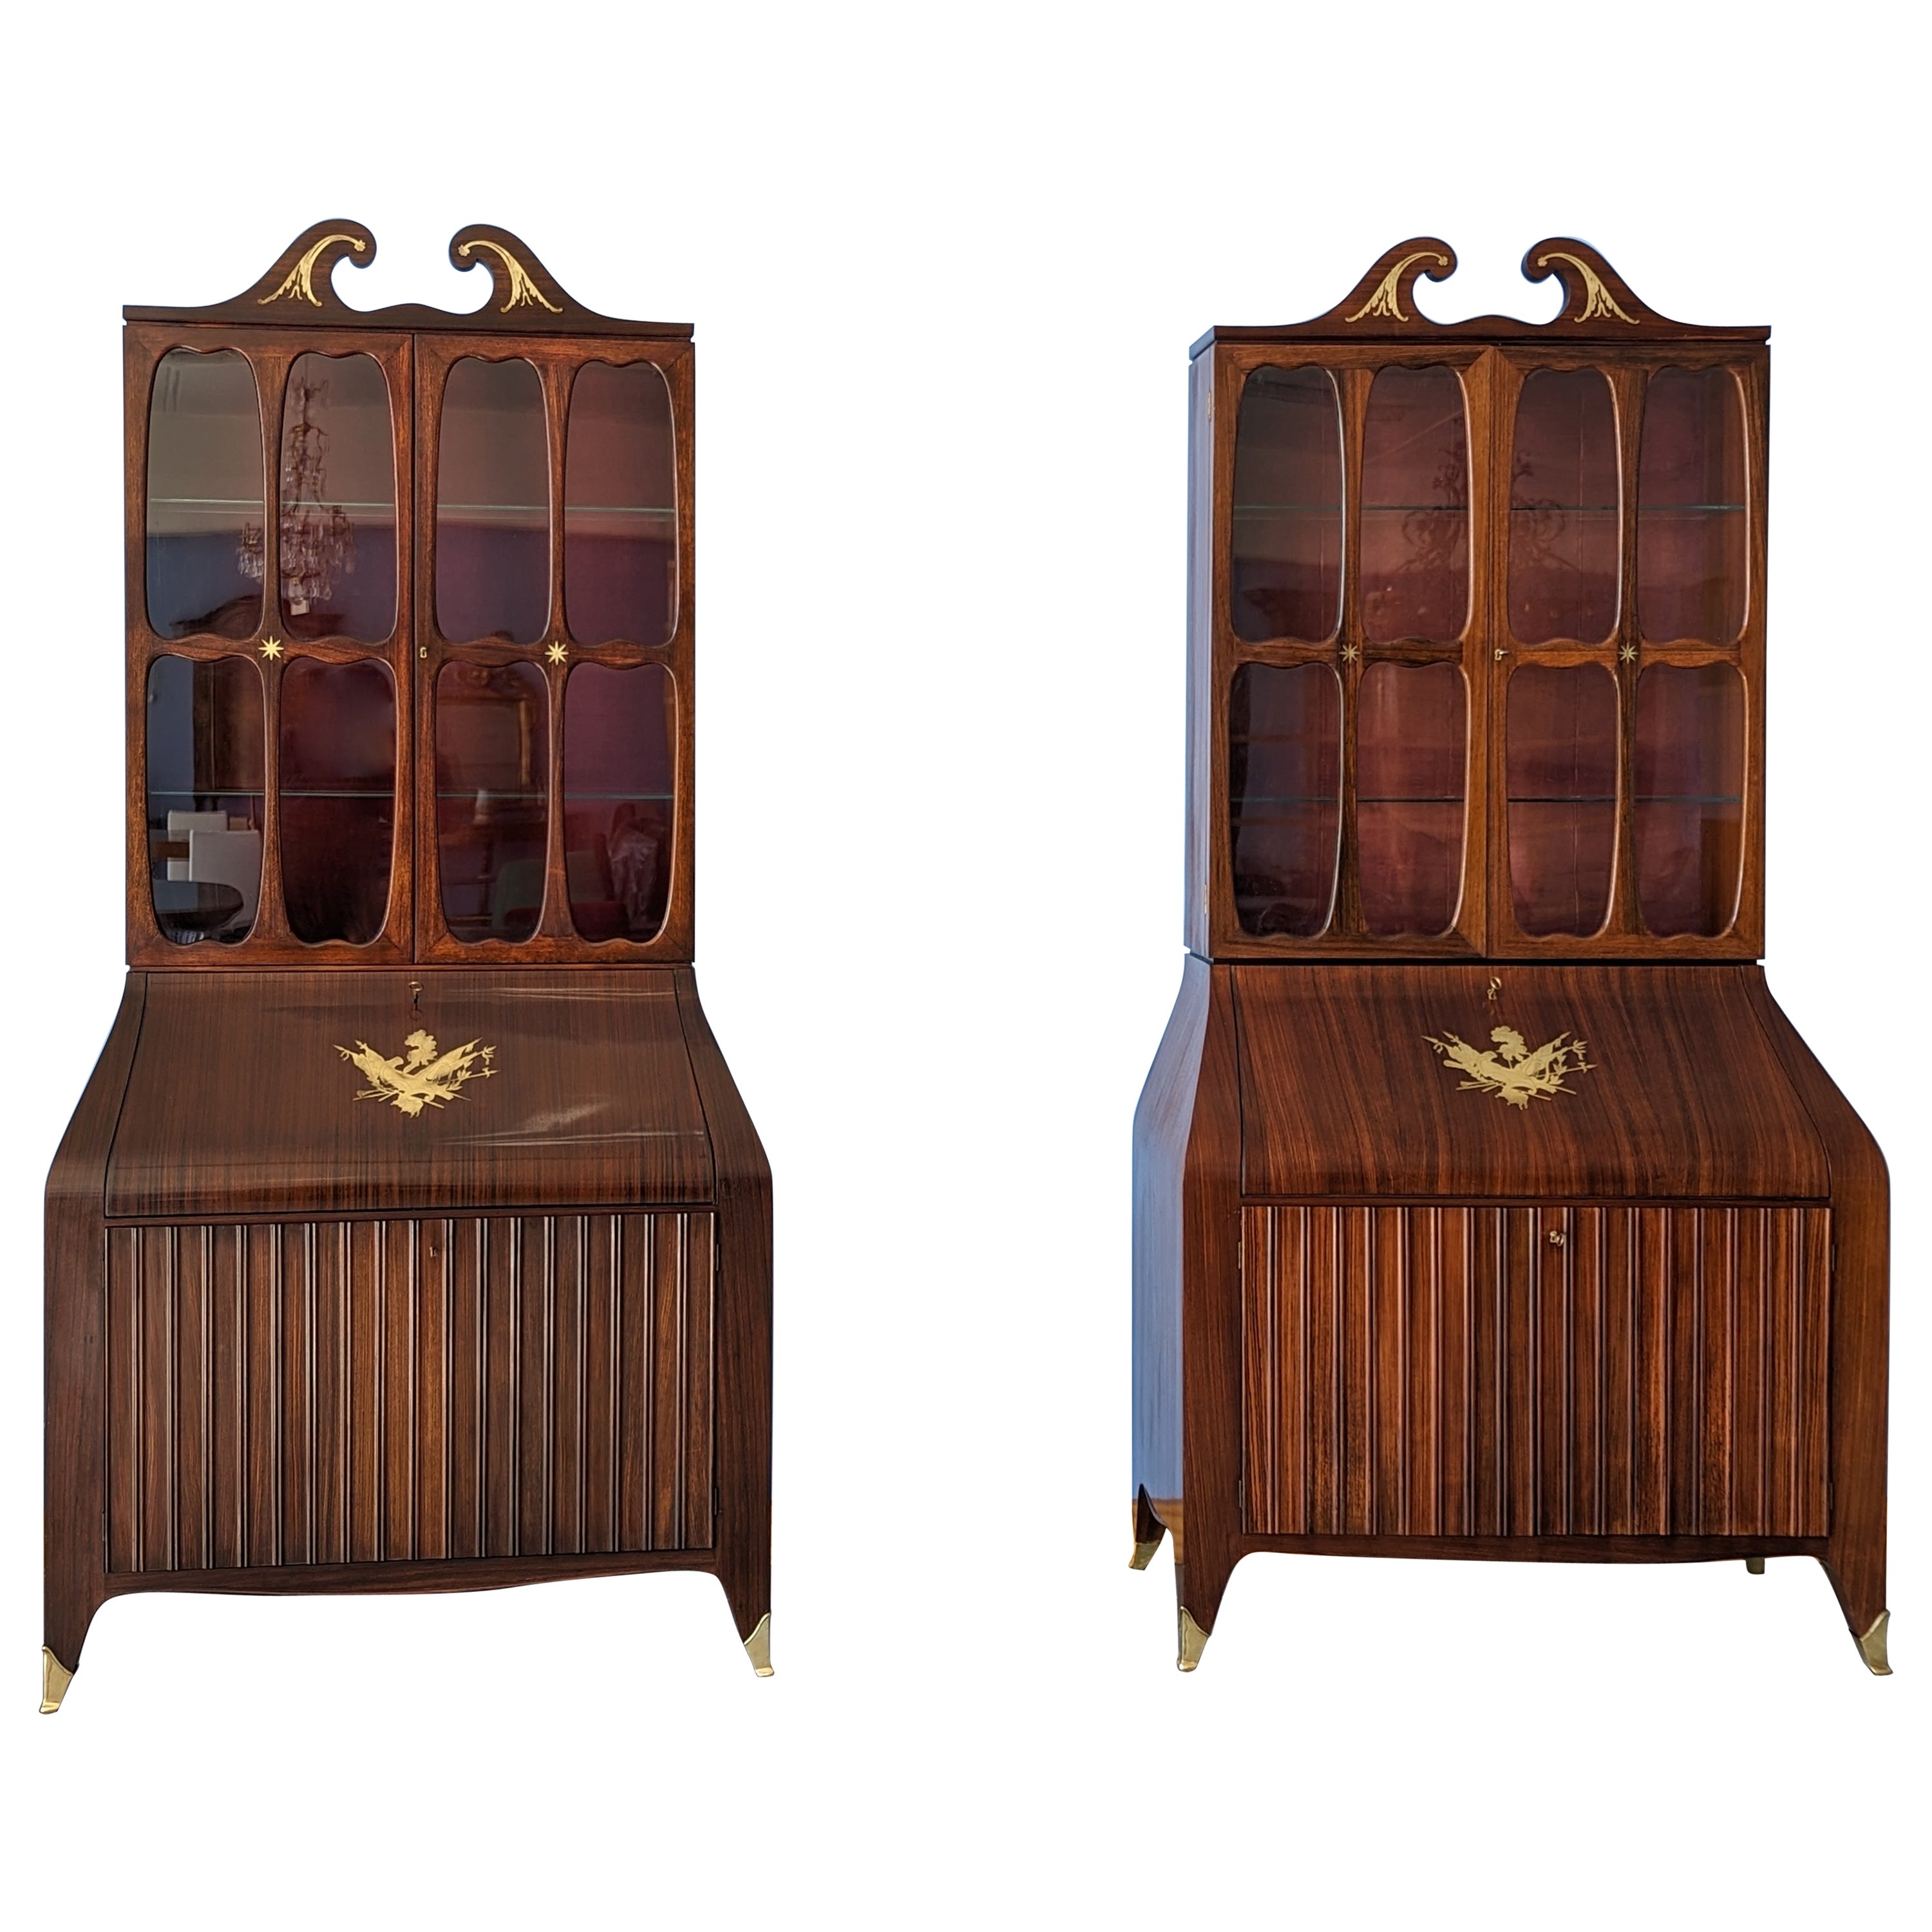 Pair of Trumeau Bookcases in Mahogany Designed by Paolo Buffa, 1950s For Sale